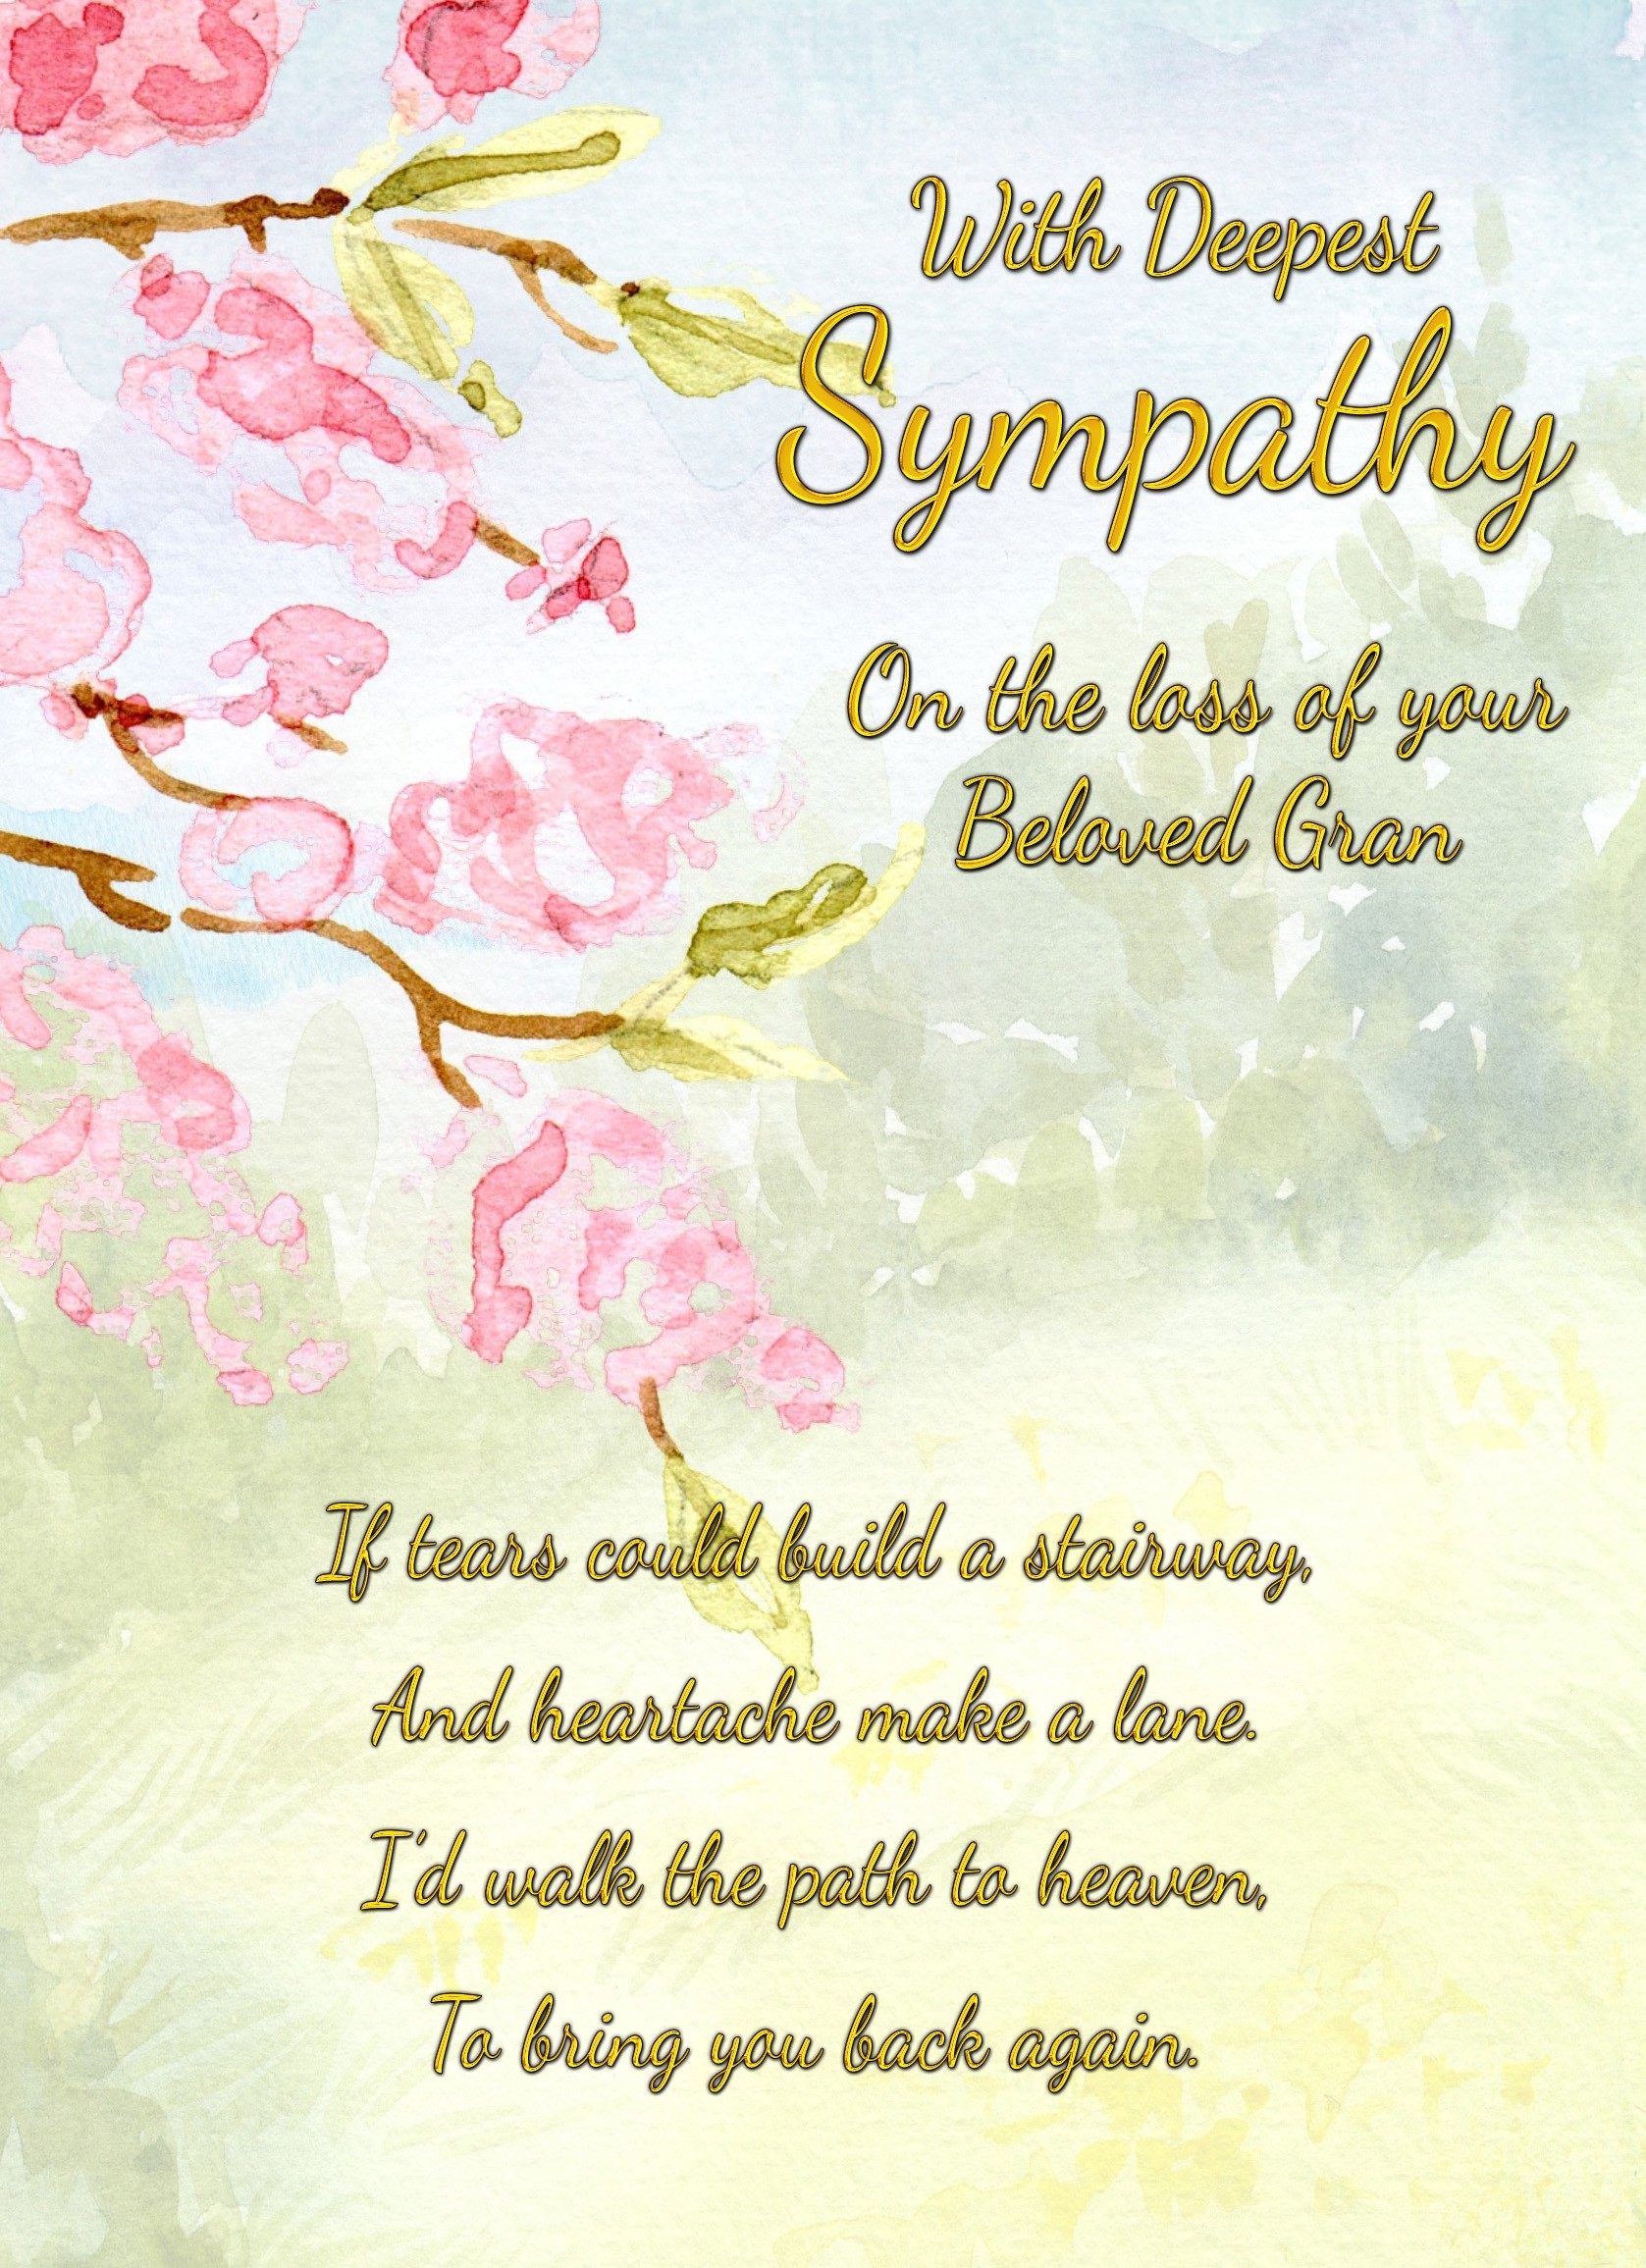 Sympathy Bereavement Card (With Deepest Sympathy, Beloved Gran)